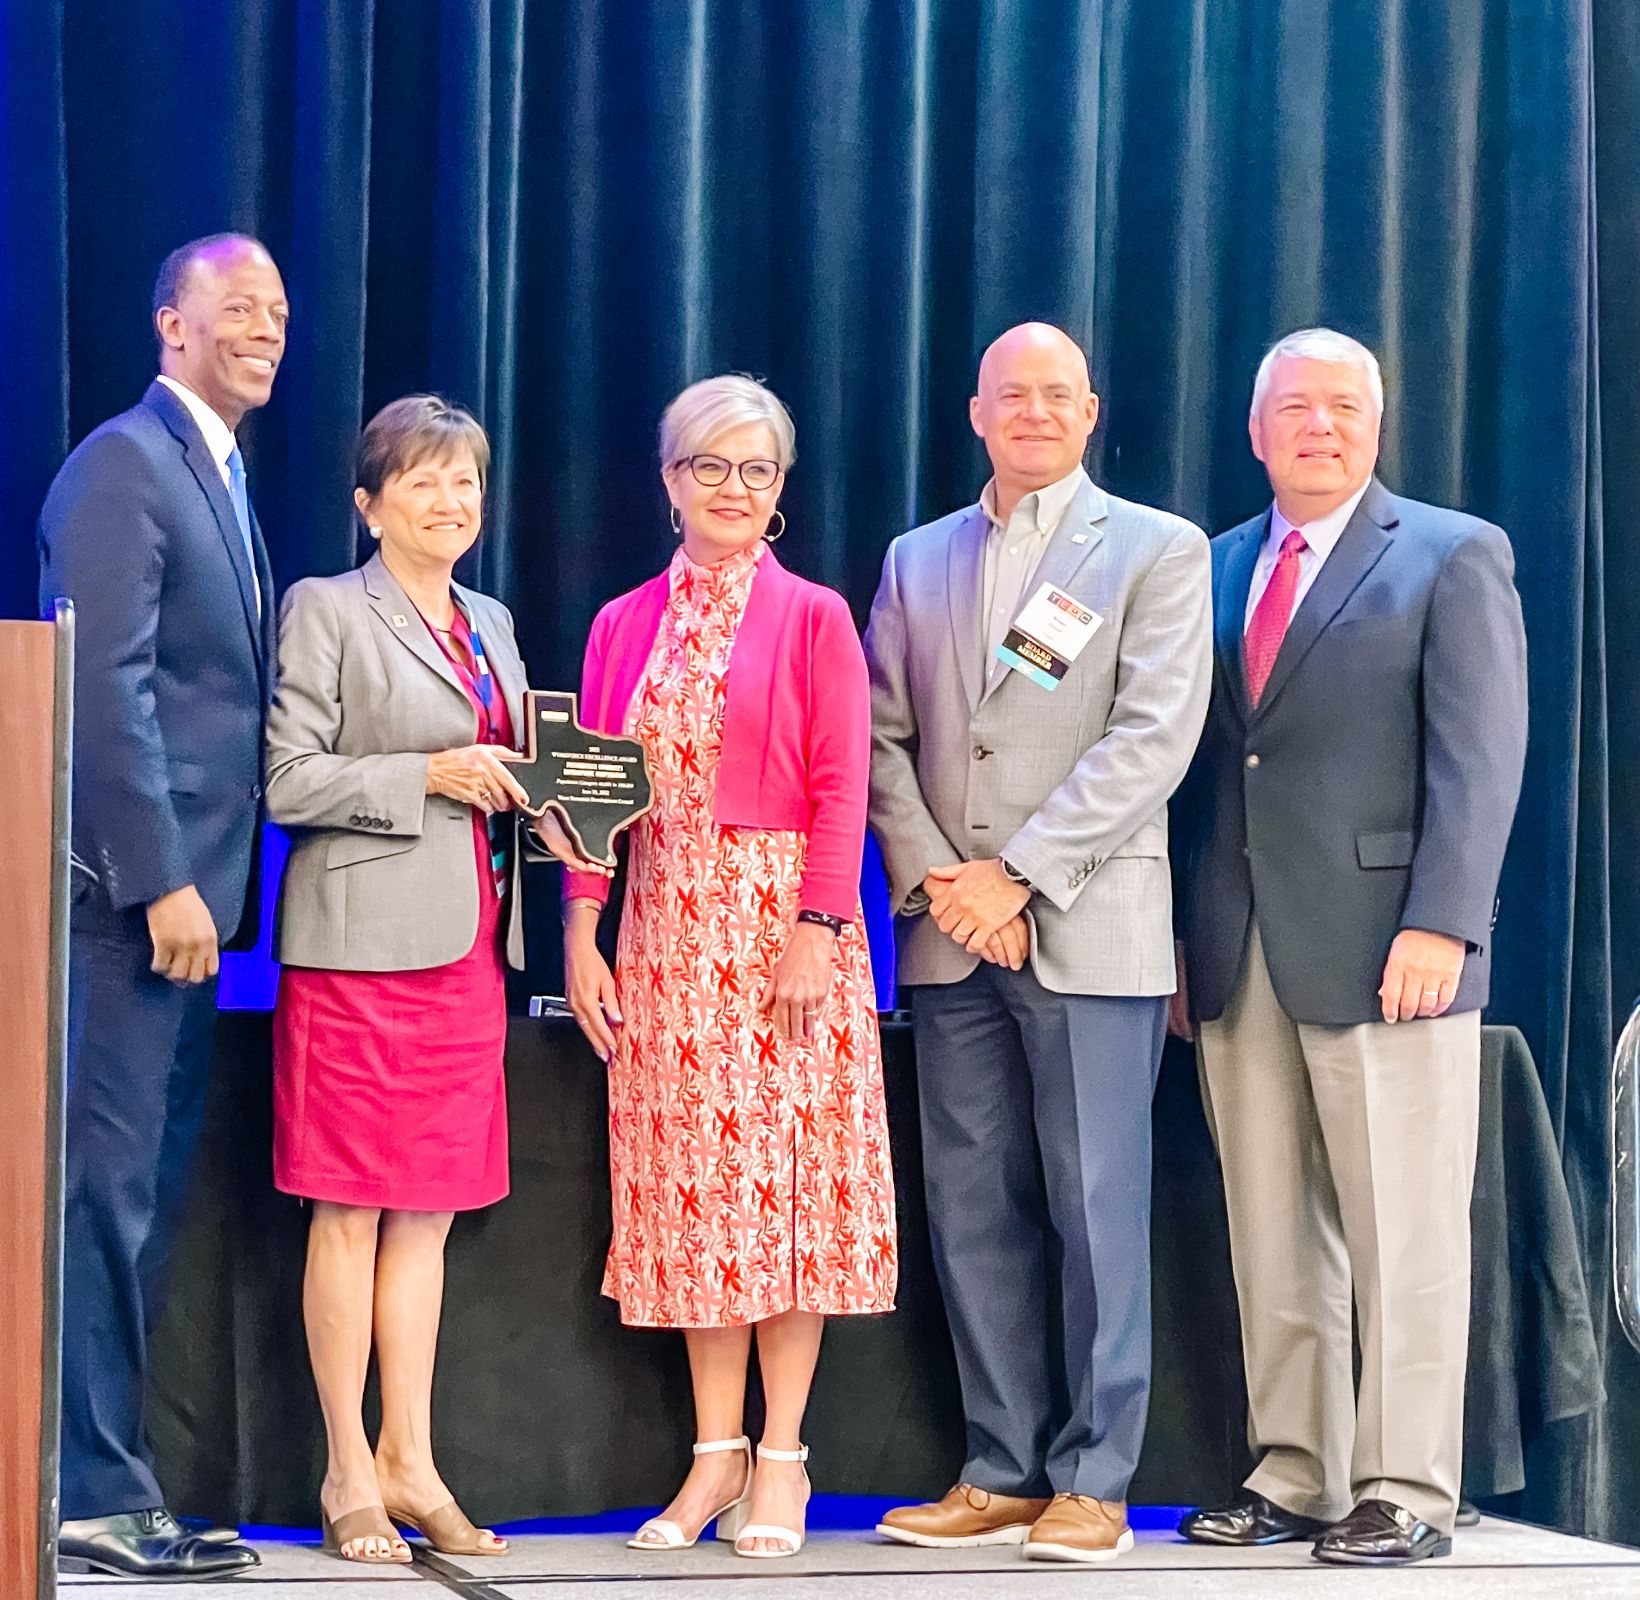 PFLUGERVILLE COMMUNITY DEVELOPMENT CORP. RECEIVES AWARD FOR WORKFORCE EXCELLENCE Photo